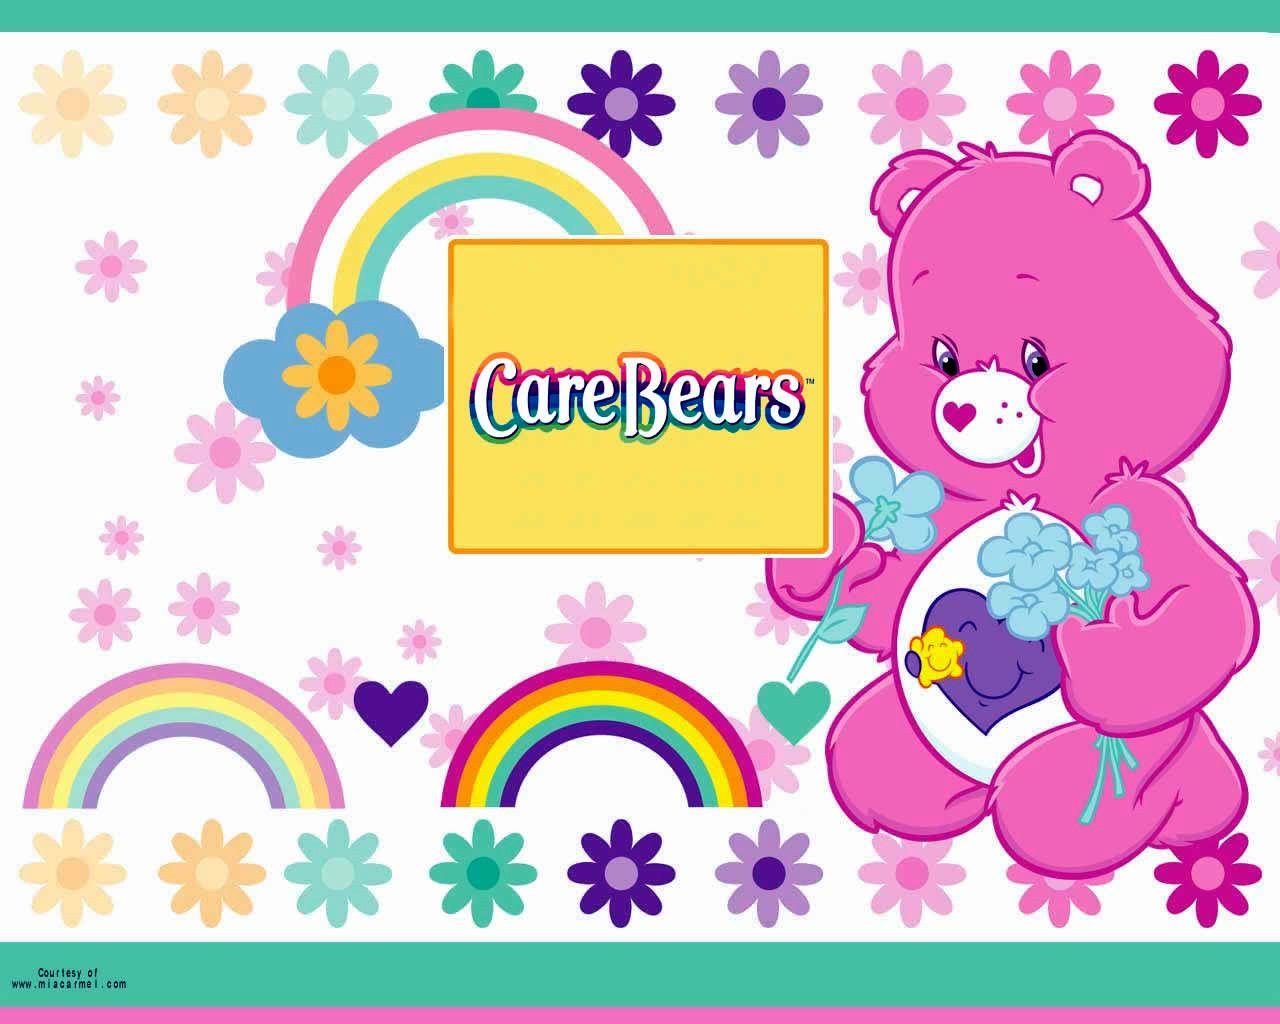 care bear wallpaper 3 - Image And Wallpaper free to download